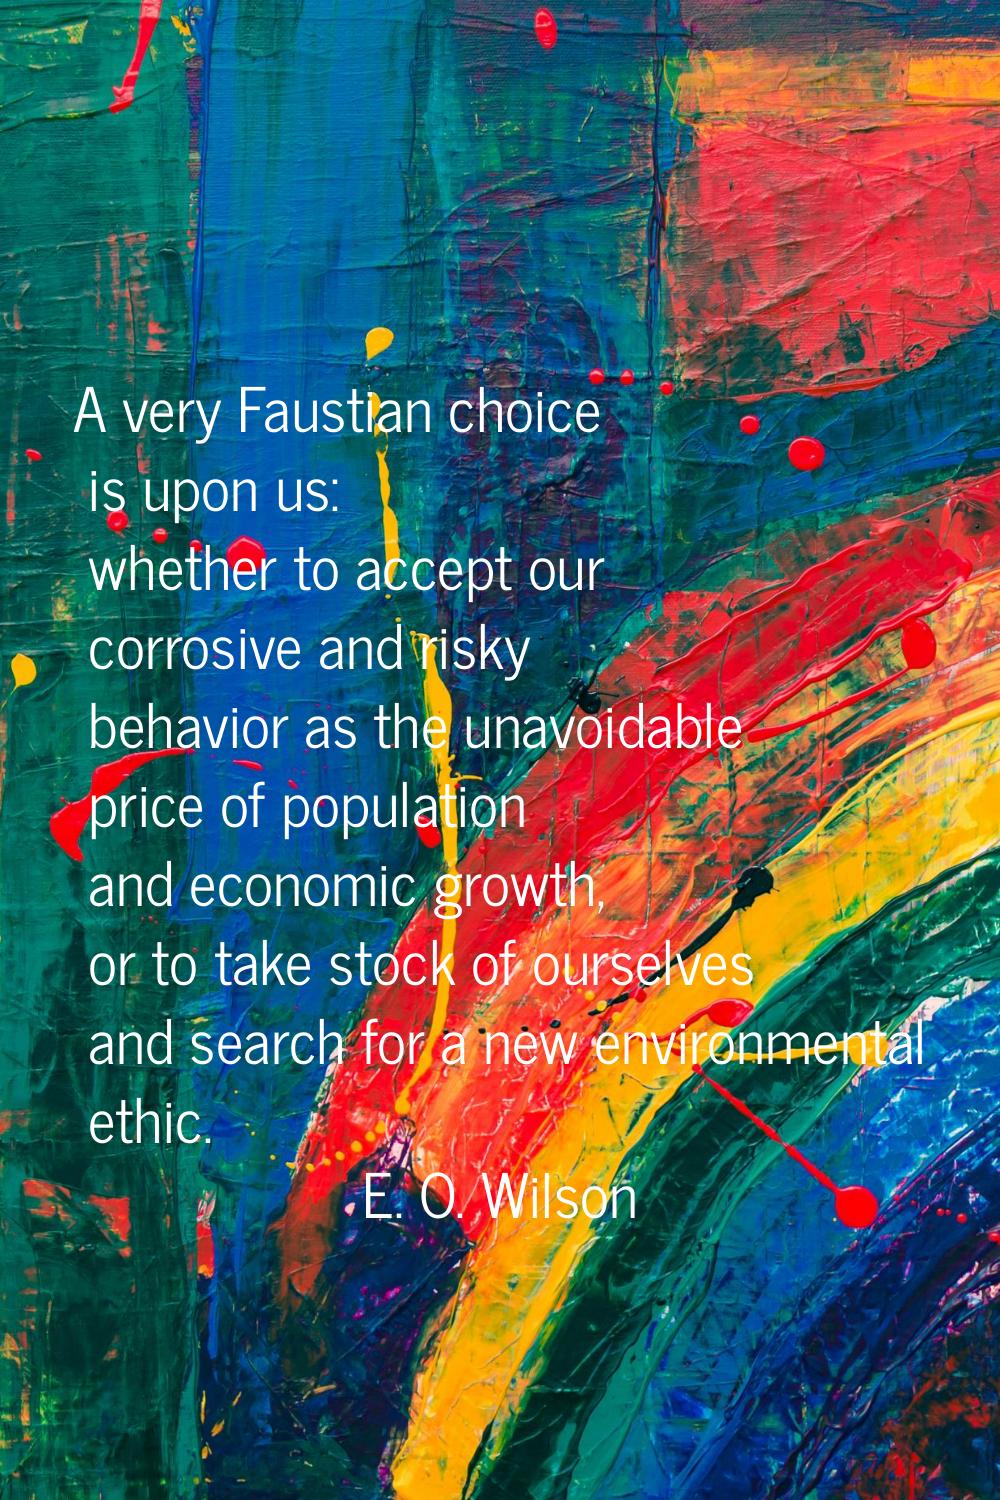 A very Faustian choice is upon us: whether to accept our corrosive and risky behavior as the unavoi